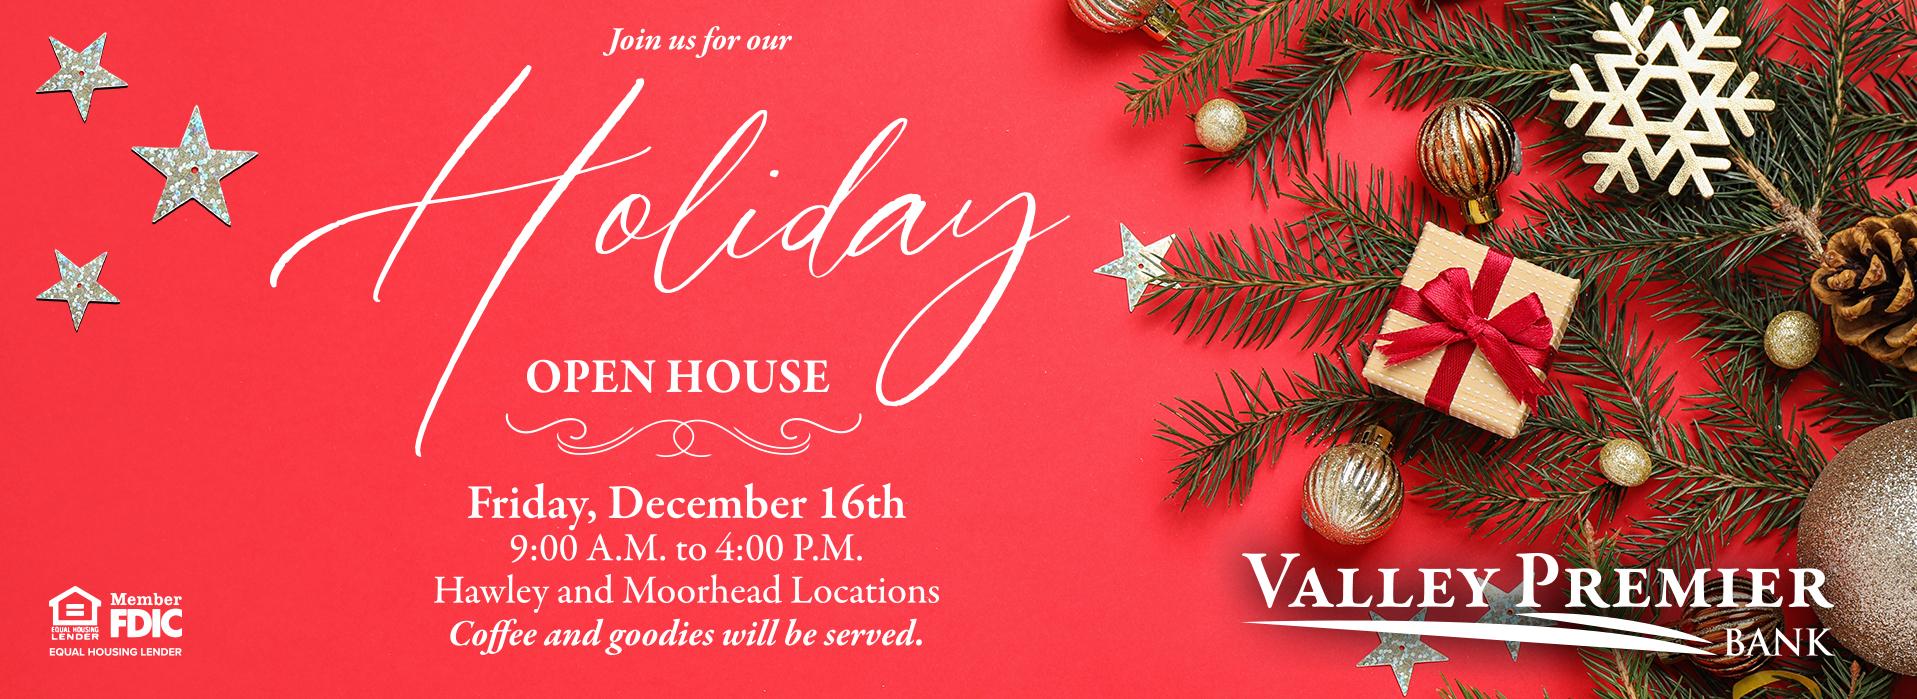 Join us for our Holiday Open House, Friday, December 16th 9 to 4 pm.  Hawley & Moorhead locations.  Coffee & goodies will be served.  Image of Christmas bough with ornaments.